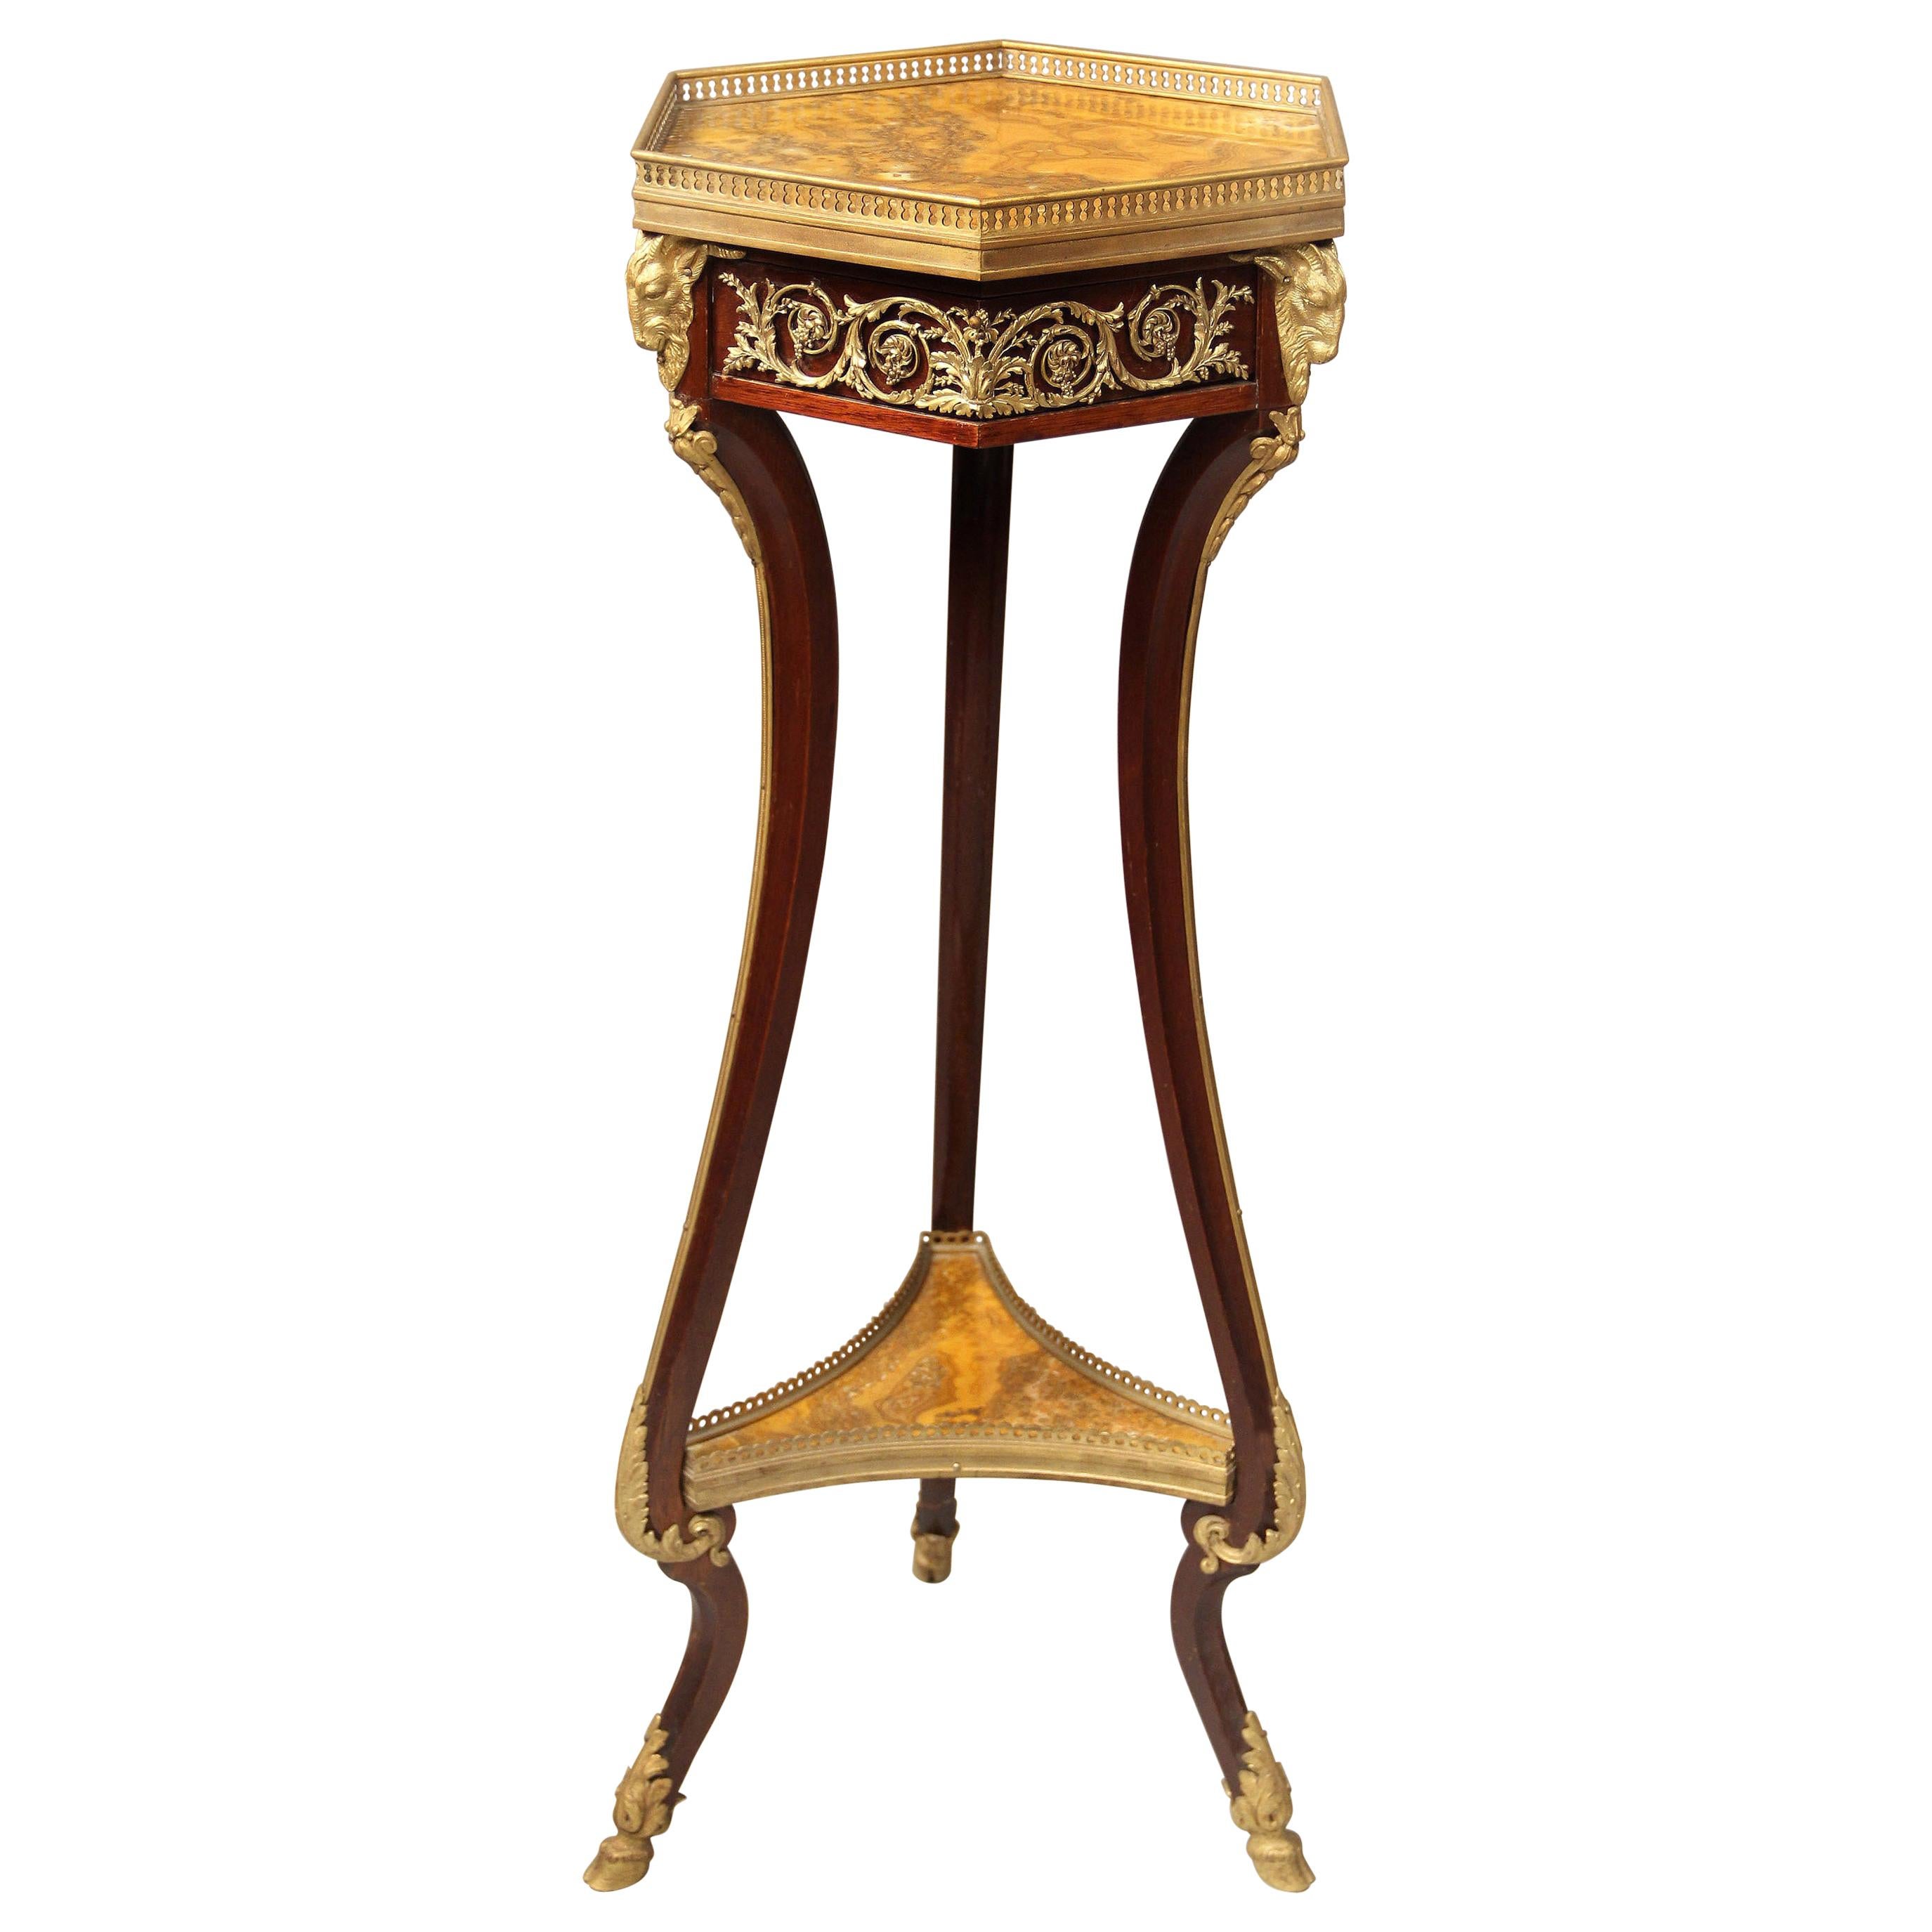 Late 19th Century Gilt Bronze Mounted Empire Style Side Table